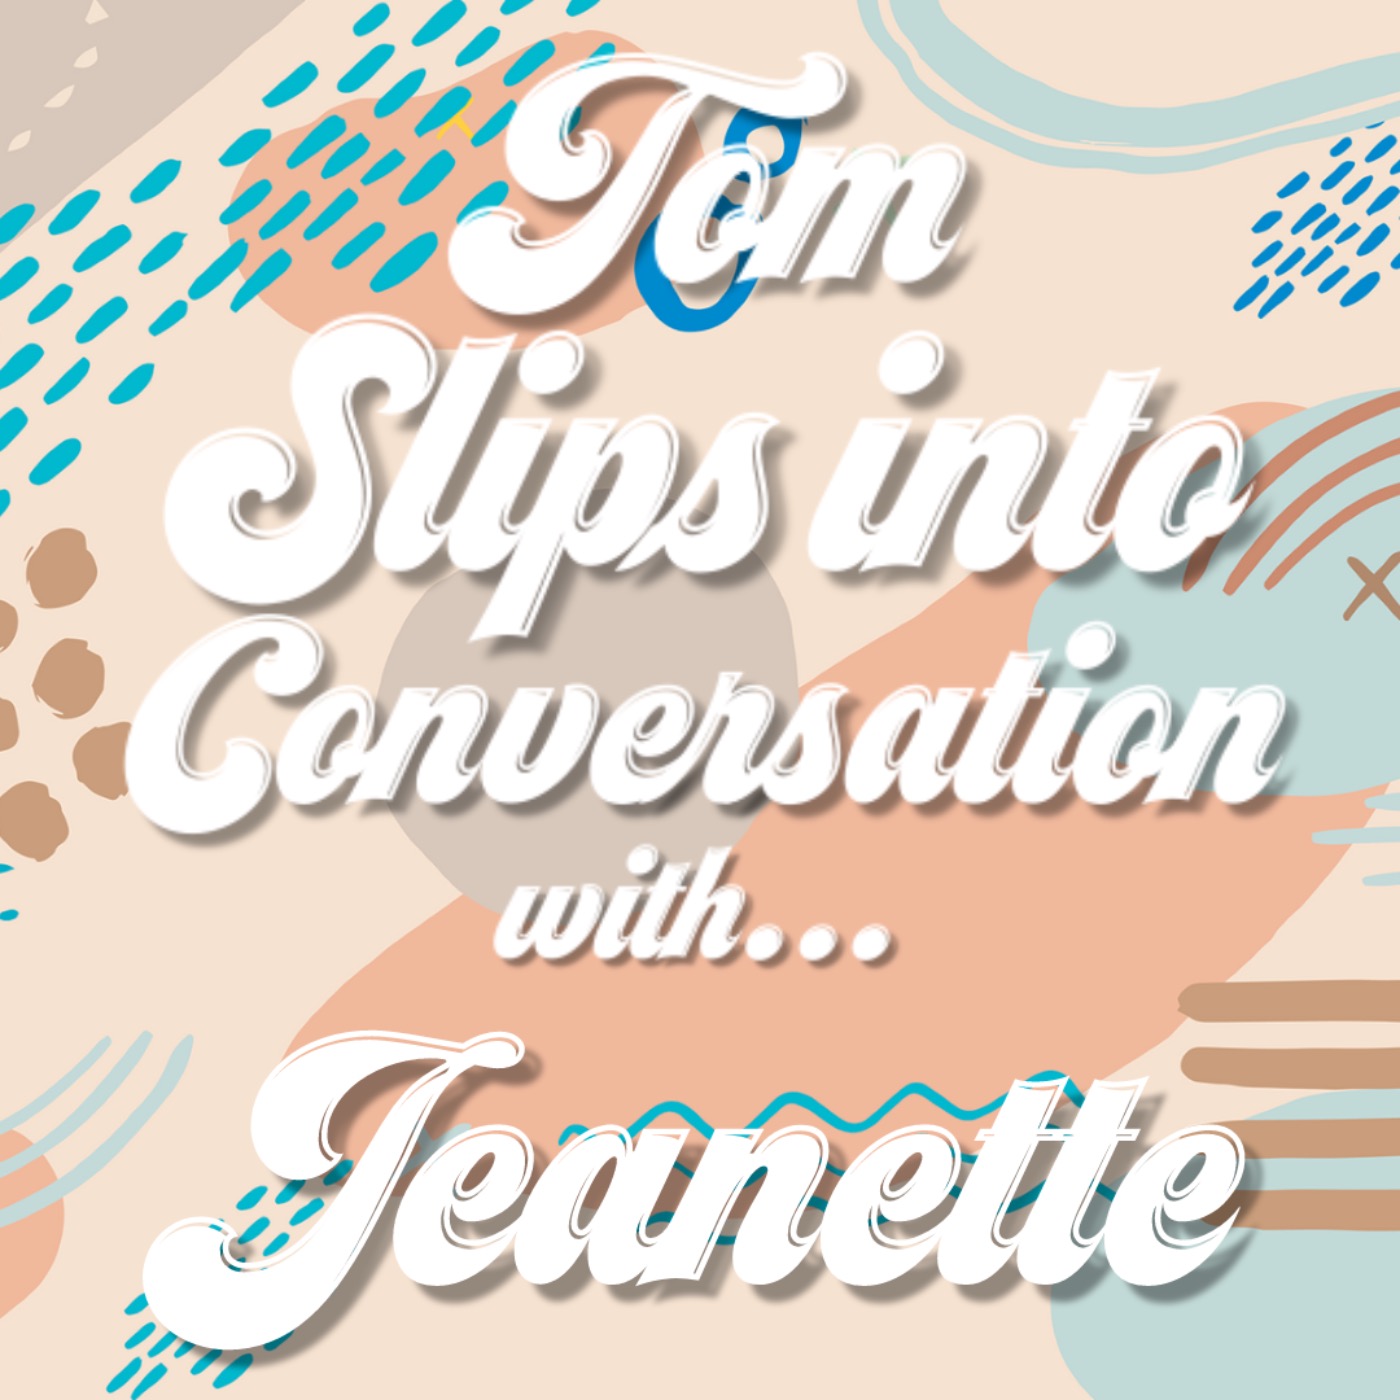 cover art for Tom slips into conversation with Jeanette